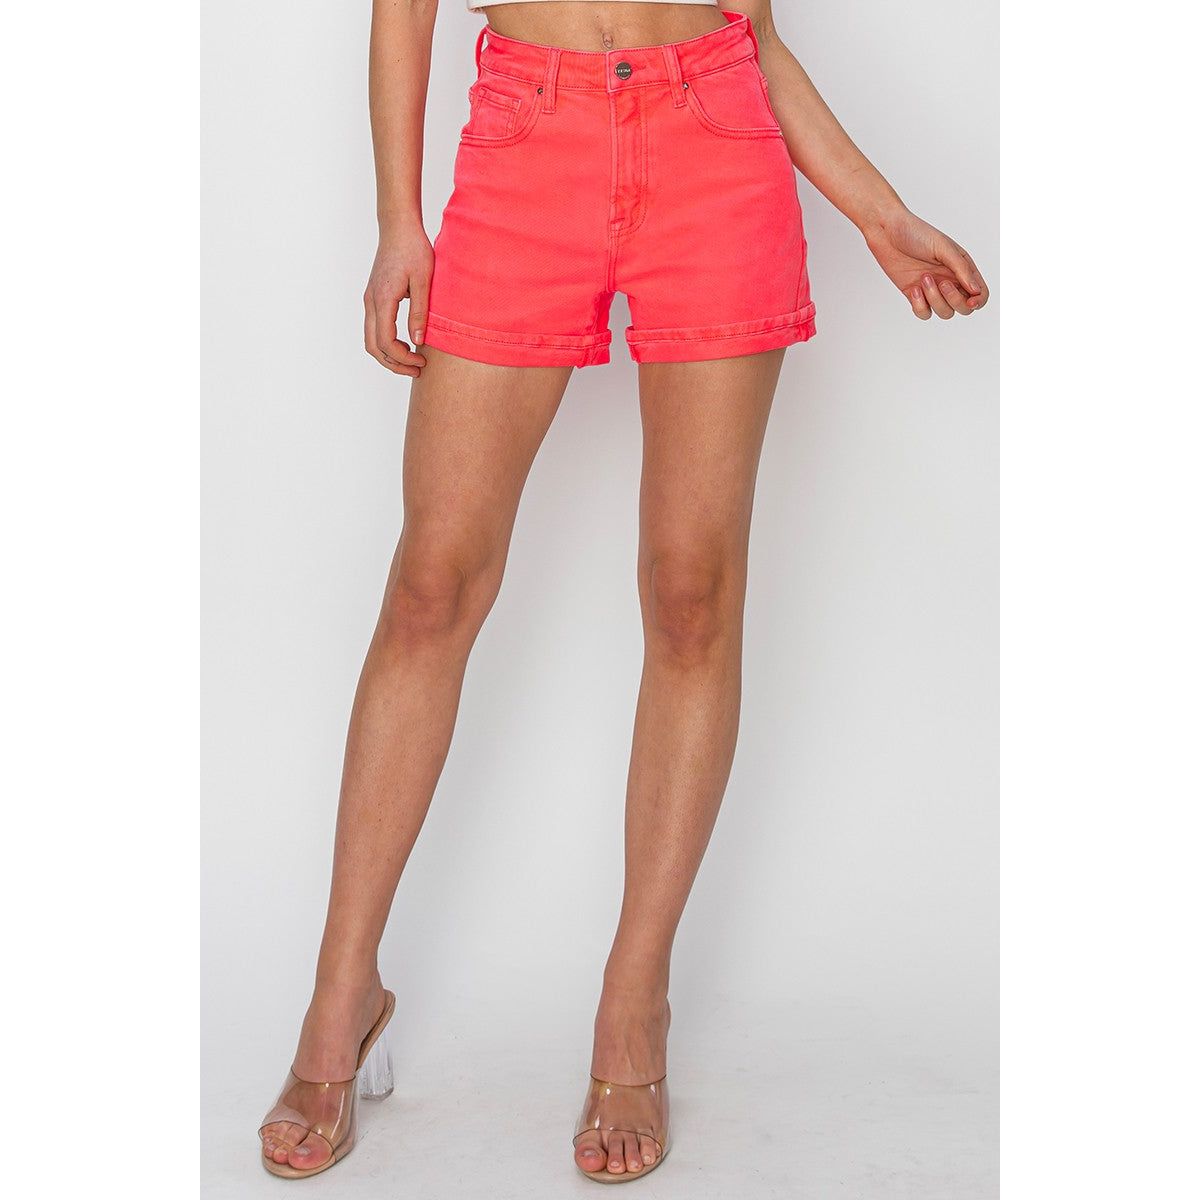 Risen Coral Lacey Shorts